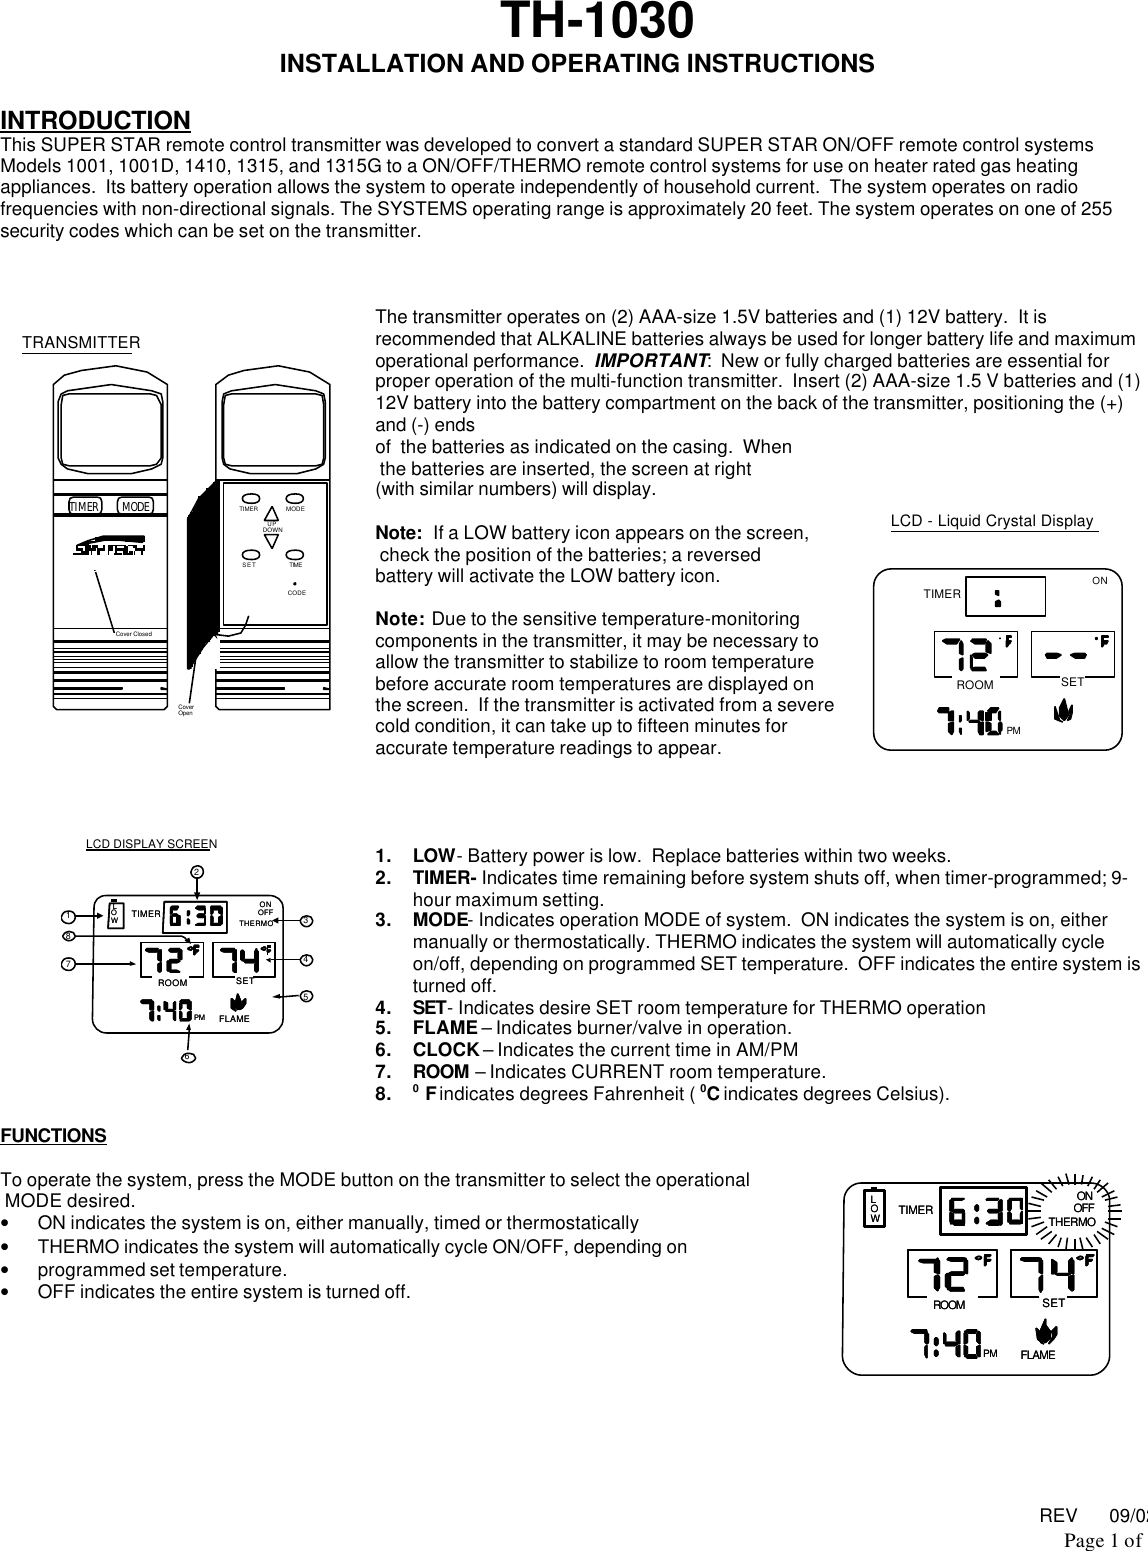 REV      09/02Page 1 of TH-1030INSTALLATION AND OPERATING INSTRUCTIONSINTRODUCTIONThis SUPER STAR remote control transmitter was developed to convert a standard SUPER STAR ON/OFF remote control systemsModels 1001, 1001D, 1410, 1315, and 1315G to a ON/OFF/THERMO remote control systems for use on heater rated gas heatingappliances.  Its battery operation allows the system to operate independently of household current.  The system operates on radiofrequencies with non-directional signals. The SYSTEMS operating range is approximately 20 feet. The system operates on one of 255security codes which can be set on the transmitter.The transmitter operates on (2) AAA-size 1.5V batteries and (1) 12V battery.  It isrecommended that ALKALINE batteries always be used for longer battery life and maximumoperational performance.  IMPORTANT:  New or fully charged batteries are essential forproper operation of the multi-function transmitter.  Insert (2) AAA-size 1.5 V batteries and (1)12V battery into the battery compartment on the back of the transmitter, positioning the (+)and (-) endsof  the batteries as indicated on the casing.  When the batteries are inserted, the screen at right(with similar numbers) will display.Note:  If a LOW battery icon appears on the screen, check the position of the batteries; a reversedbattery will activate the LOW battery icon.Note:  Due to the sensitive temperature-monitoringcomponents in the transmitter, it may be necessary toallow the transmitter to stabilize to room temperaturebefore accurate room temperatures are displayed onthe screen.  If the transmitter is activated from a severecold condition, it can take up to fifteen minutes foraccurate temperature readings to appear.1. LOW- Battery power is low.  Replace batteries within two weeks.2. TIMER- Indicates time remaining before system shuts off, when timer-programmed; 9-hour maximum setting.3. MODE- Indicates operation MODE of system.  ON indicates the system is on, eithermanually or thermostatically. THERMO indicates the system will automatically cycleon/off, depending on programmed SET temperature.  OFF indicates the entire system isturned off.4. SET- Indicates desire SET room temperature for THERMO operation5. FLAME – Indicates burner/valve in operation.6. CLOCK – Indicates the current time in AM/PM7. ROOM – Indicates CURRENT room temperature.8. 0 F indicates degrees Fahrenheit ( 0C indicates degrees Celsius).FUNCTIONSTo operate the system, press the MODE button on the transmitter to select the operational MODE desired.• ON indicates the system is on, either manually, timed or thermostatically• THERMO indicates the system will automatically cycle ON/OFF, depending on• programmed set temperature.• OFF indicates the entire system is turned off.TRANSMITTERCover ClosedMODETIMER  TIMER  MODE SET TIME UPDOWNCODECoverOpenLCD DISPLAY SCREEN18723546ONROOMLOWOFFTIMER THERMOSETPM FLAMEONROOMLOWOFFTIMER THERMOSETPM FLAMEONROOMLOWOFFTIMER THERMOSETPM FLAMEONROOMLOWOFFTIMER THERMOSETPM FLAMELCD - Liquid Crystal DisplayONROOMTIMERSETPM